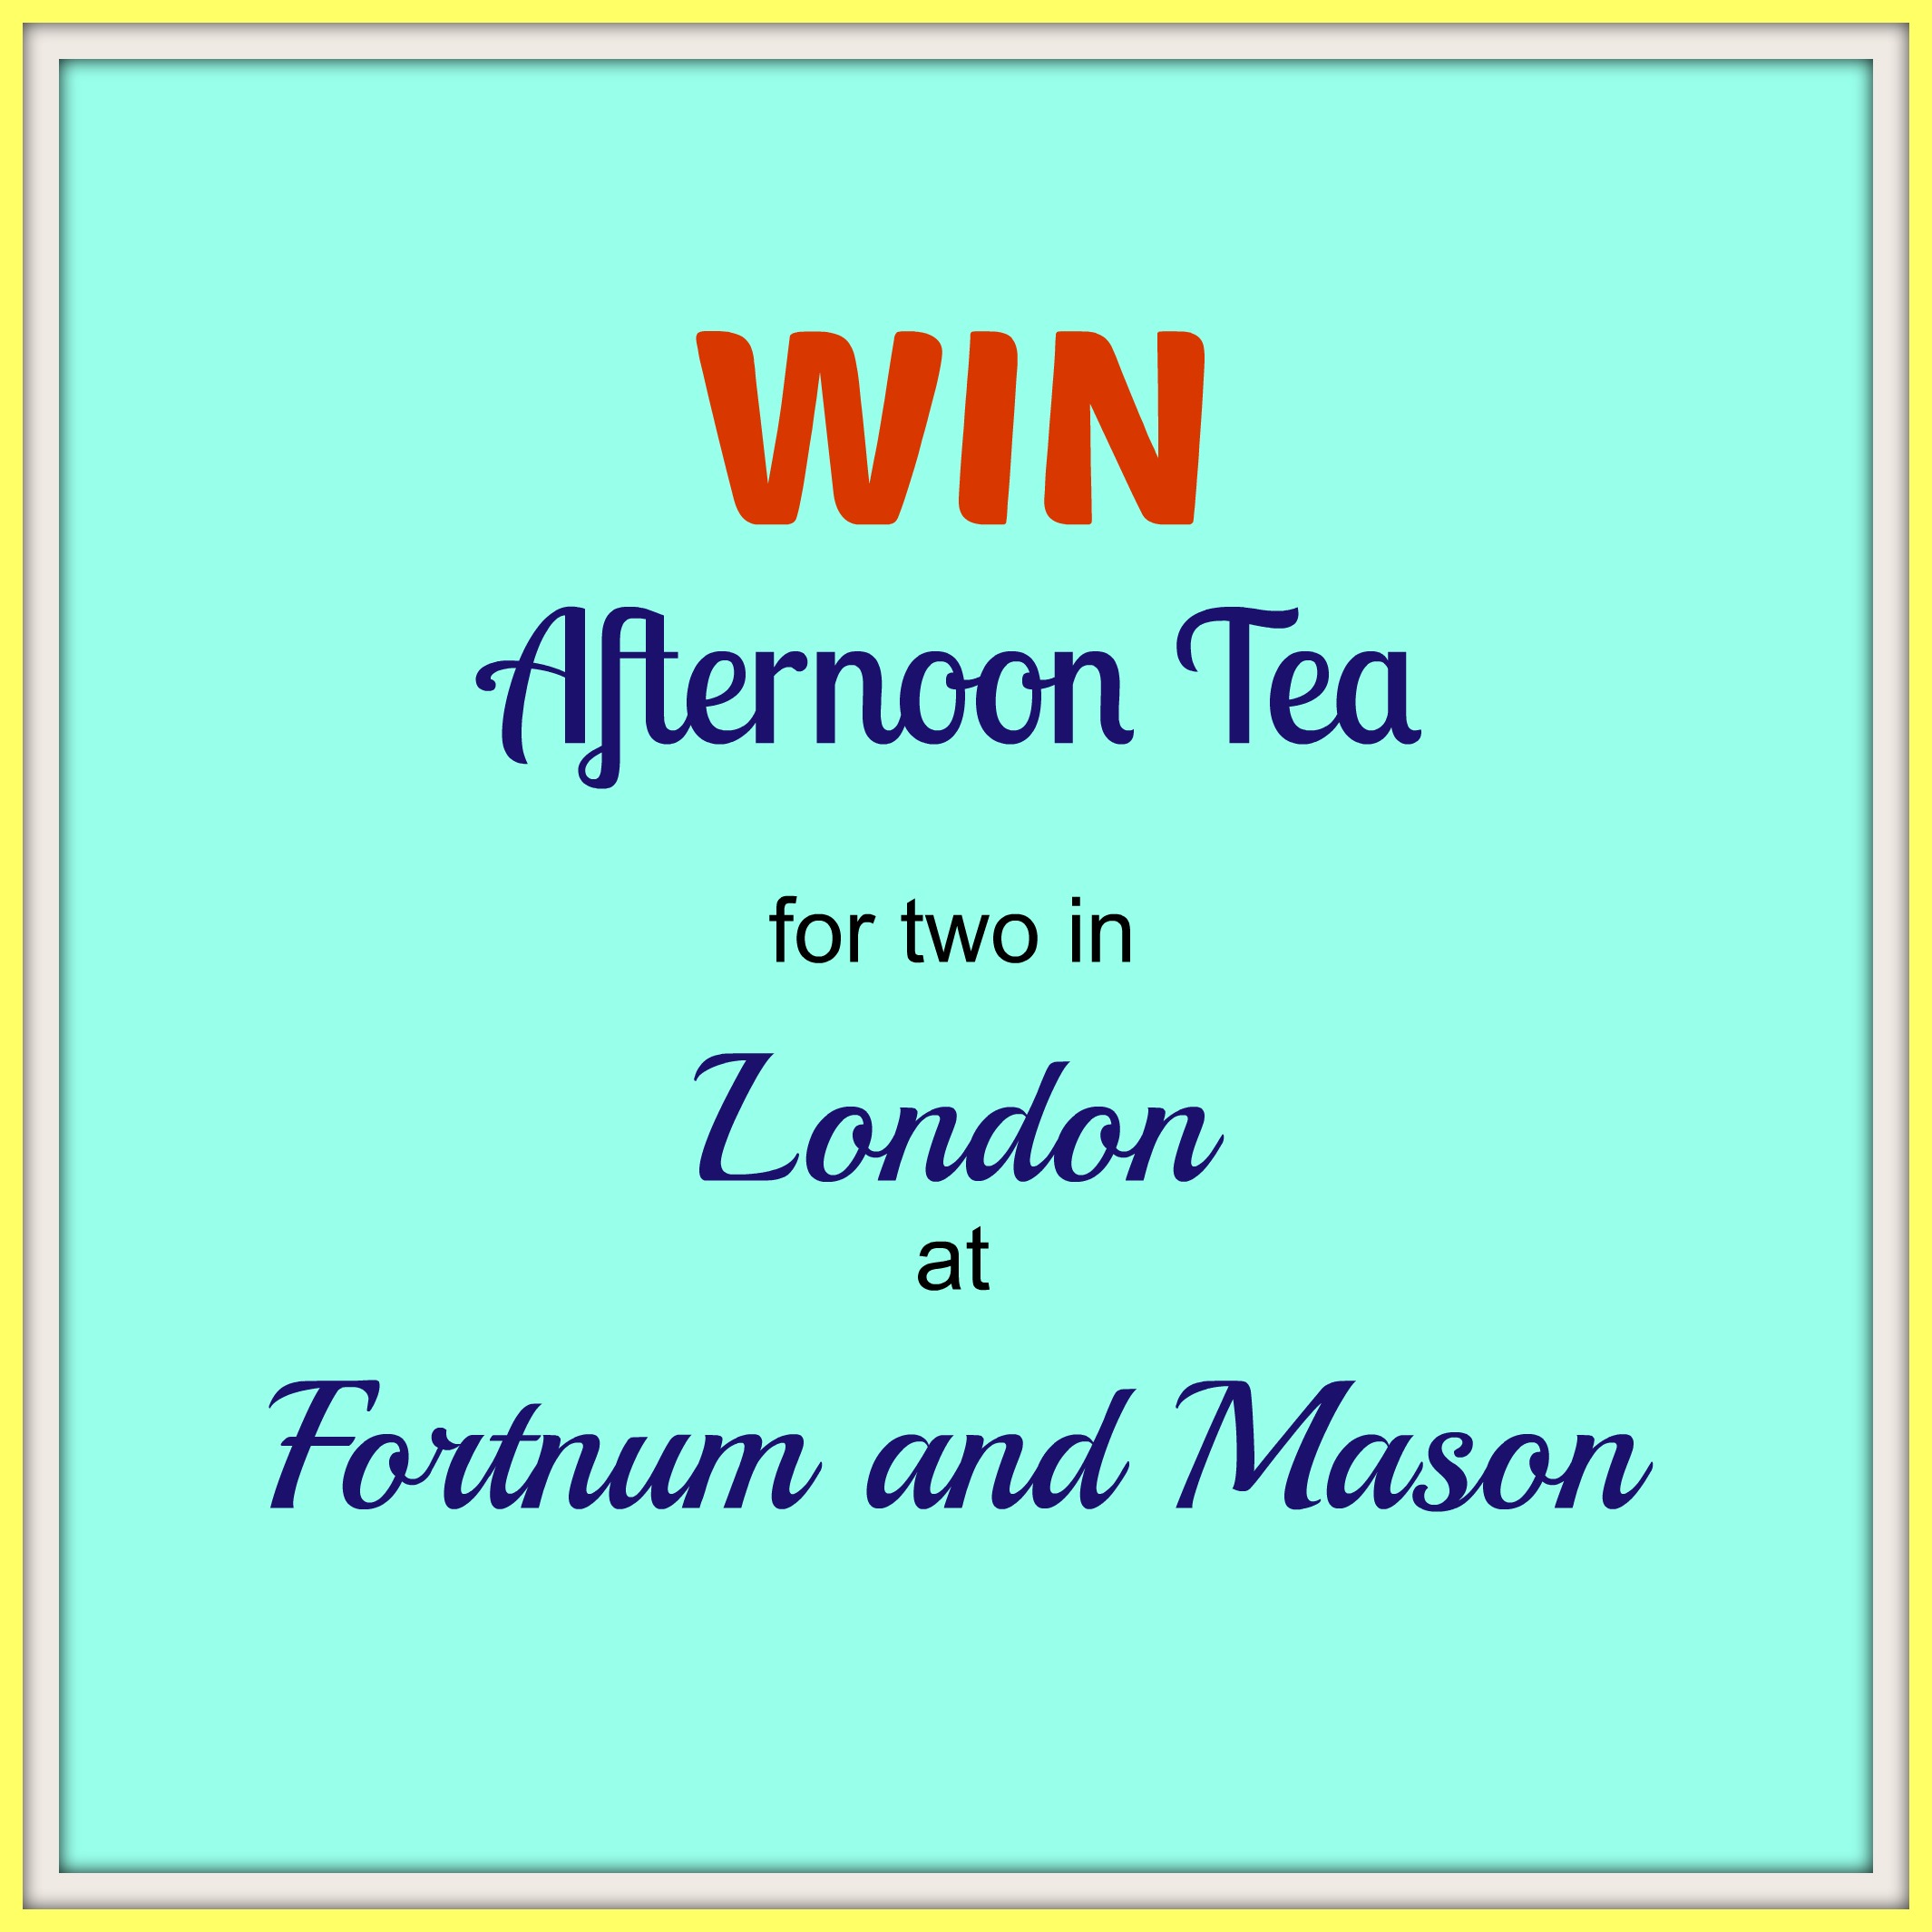 An Afternoon Tea Giveaway approved by the Queen!